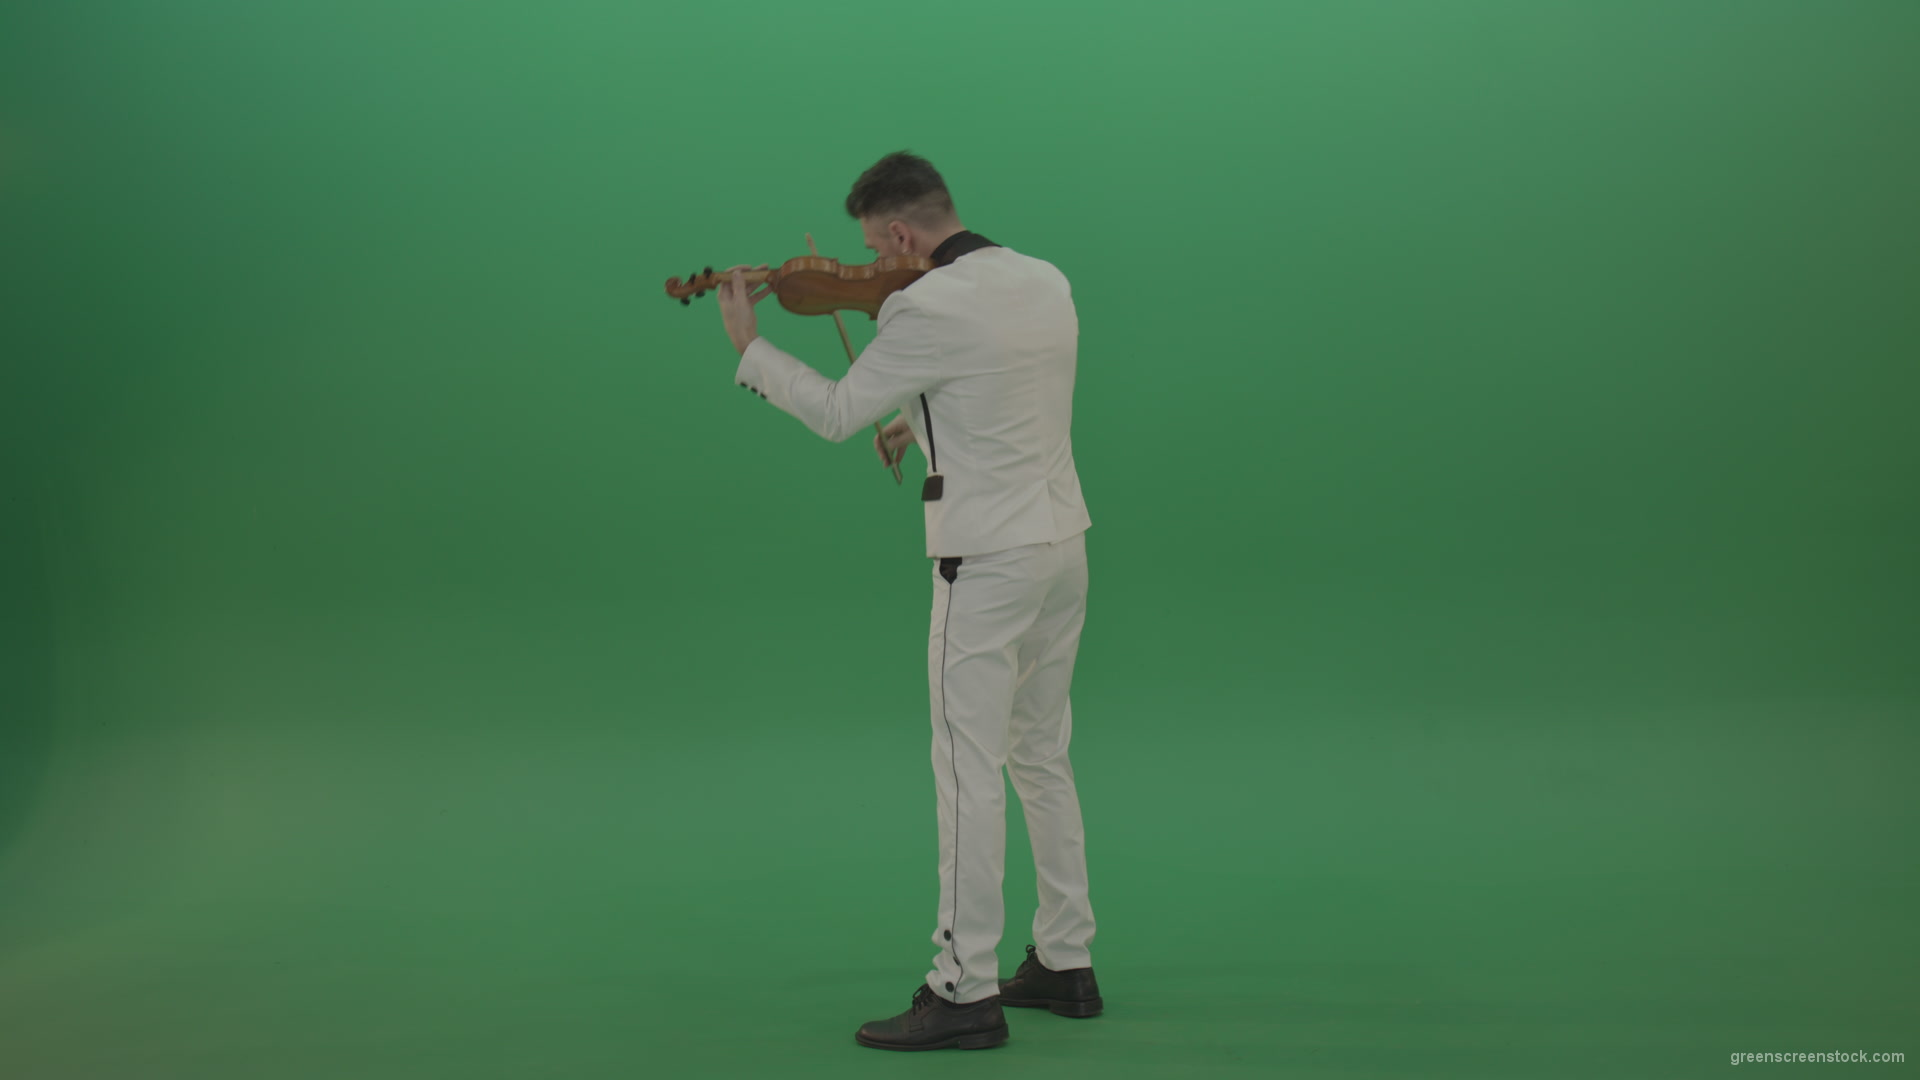 Full-size-Classic-orchestra-man-in-white-wear-play-violin-strings-music-instrument-isolated-on-green-screen-back-side-view_009 Green Screen Stock